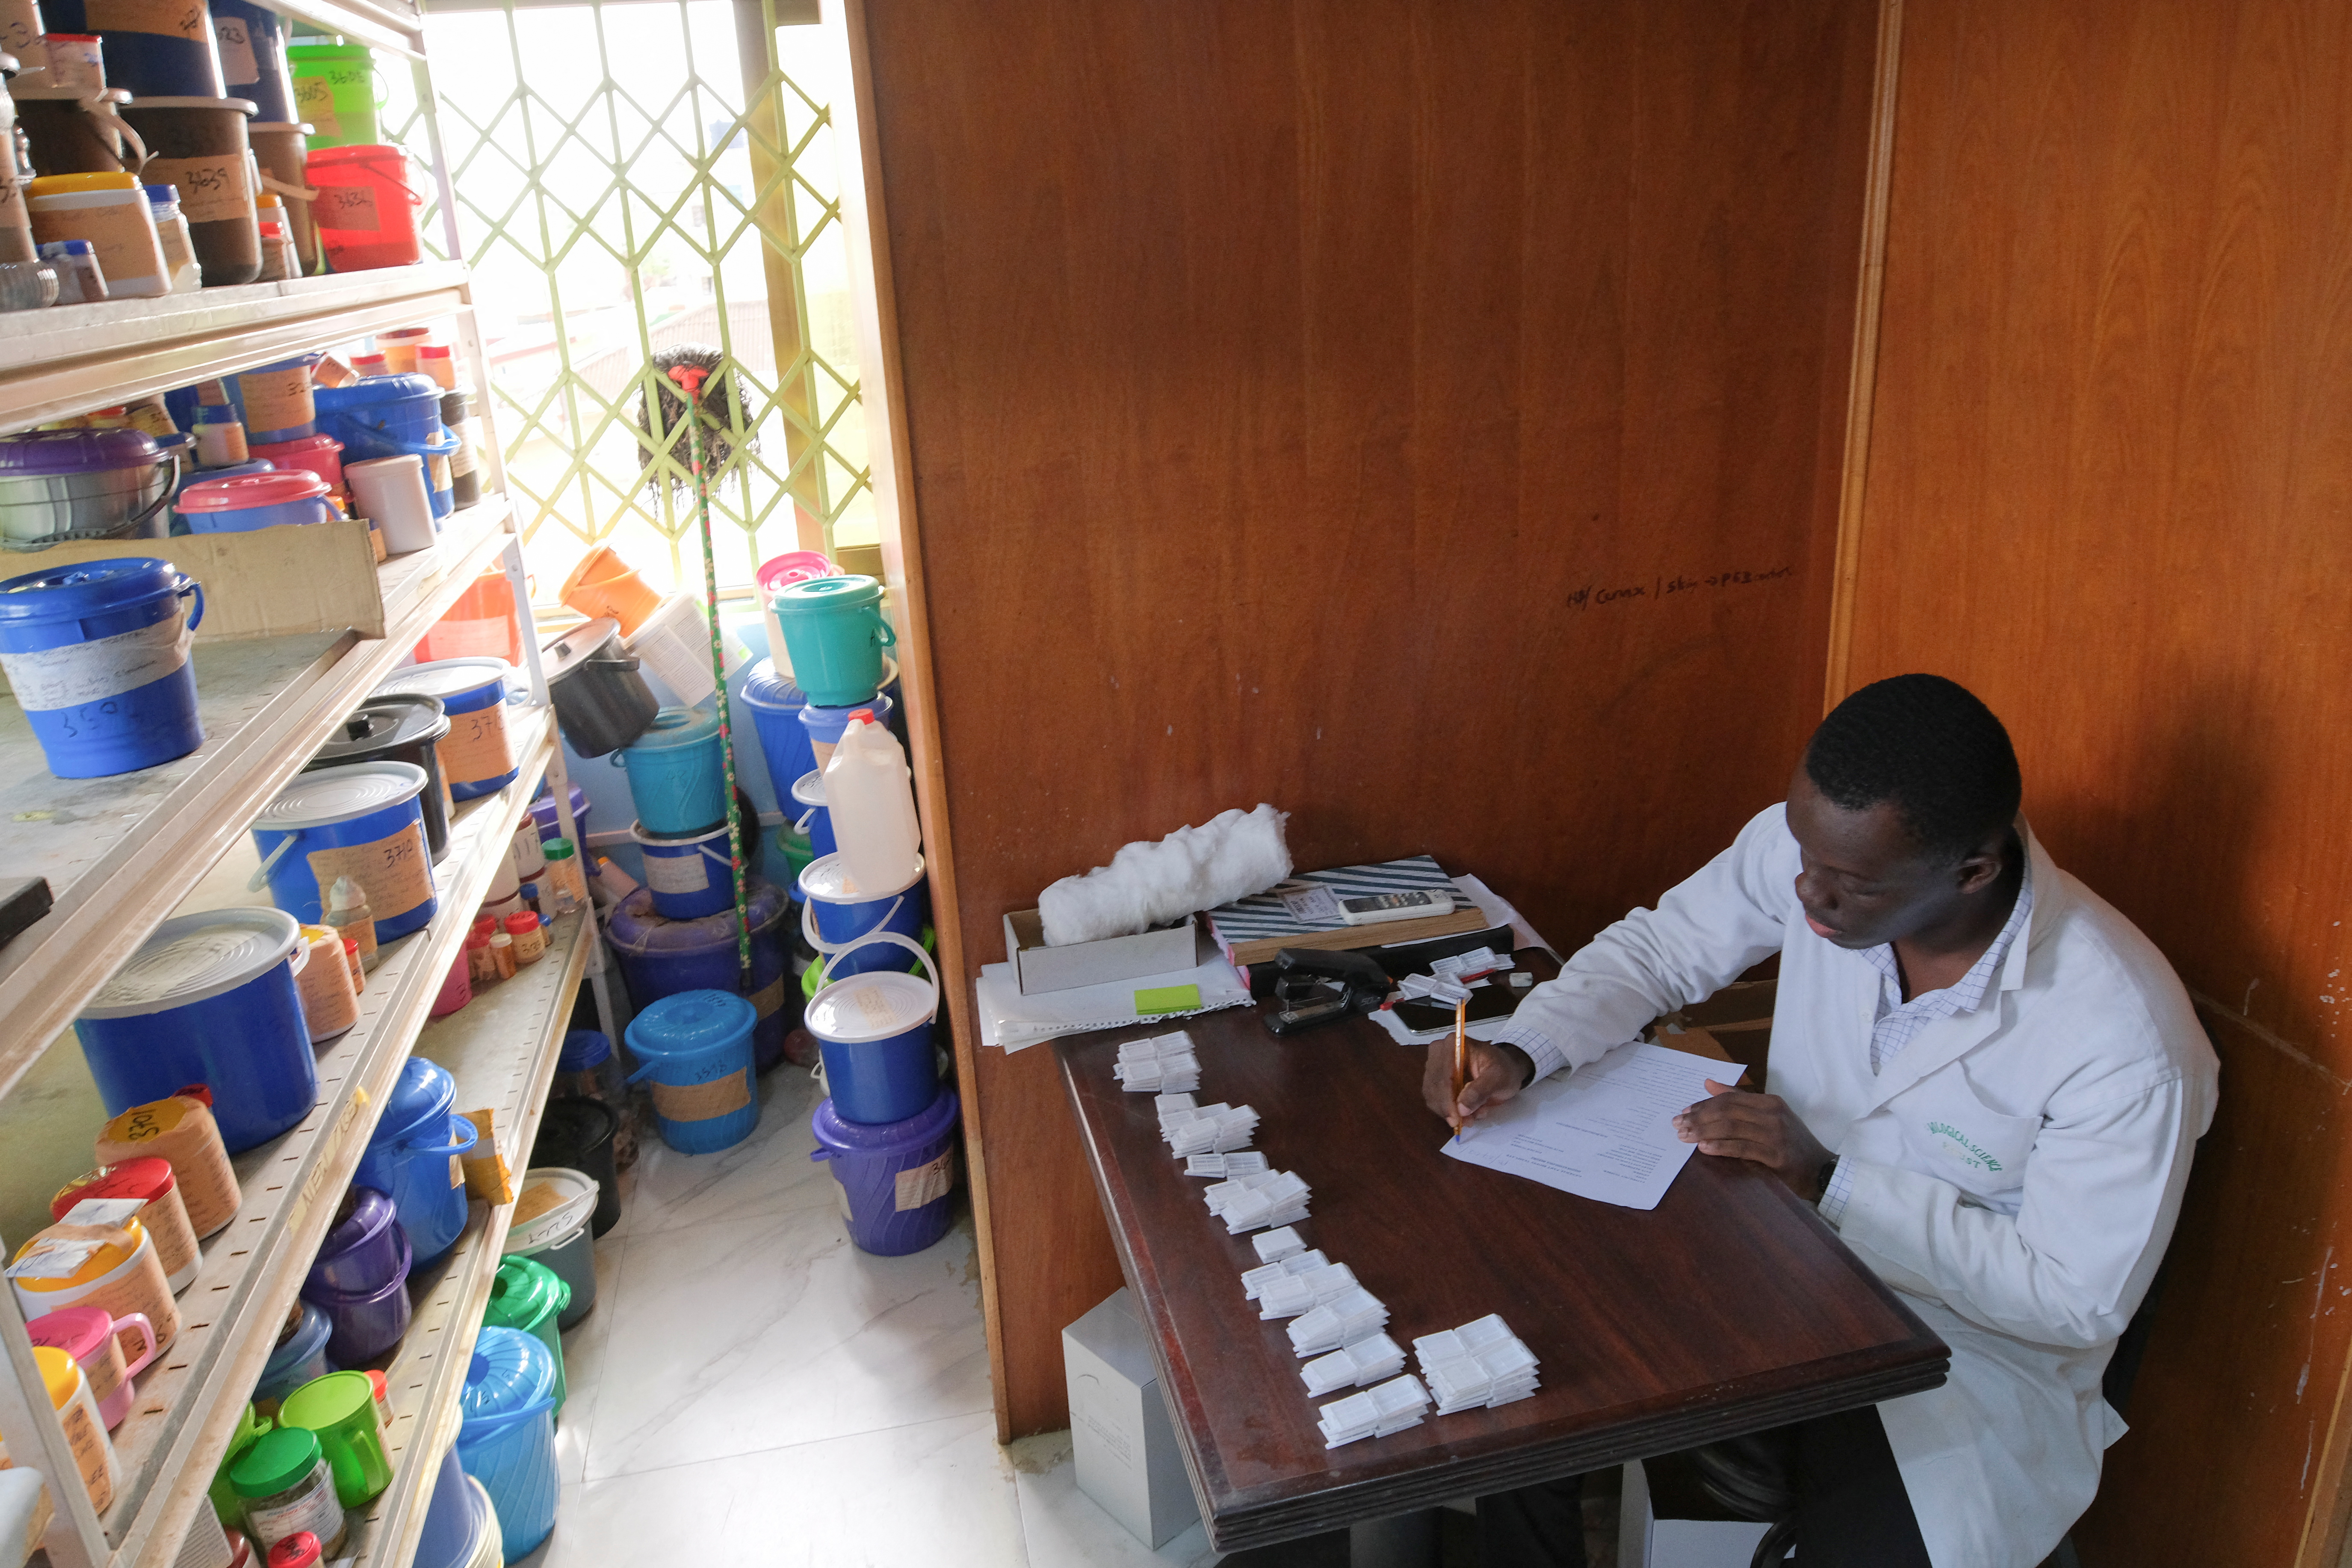 Ron Dickson, 25, a technician, records specimens received at the Pathologists Without Borders laboratory in Accra